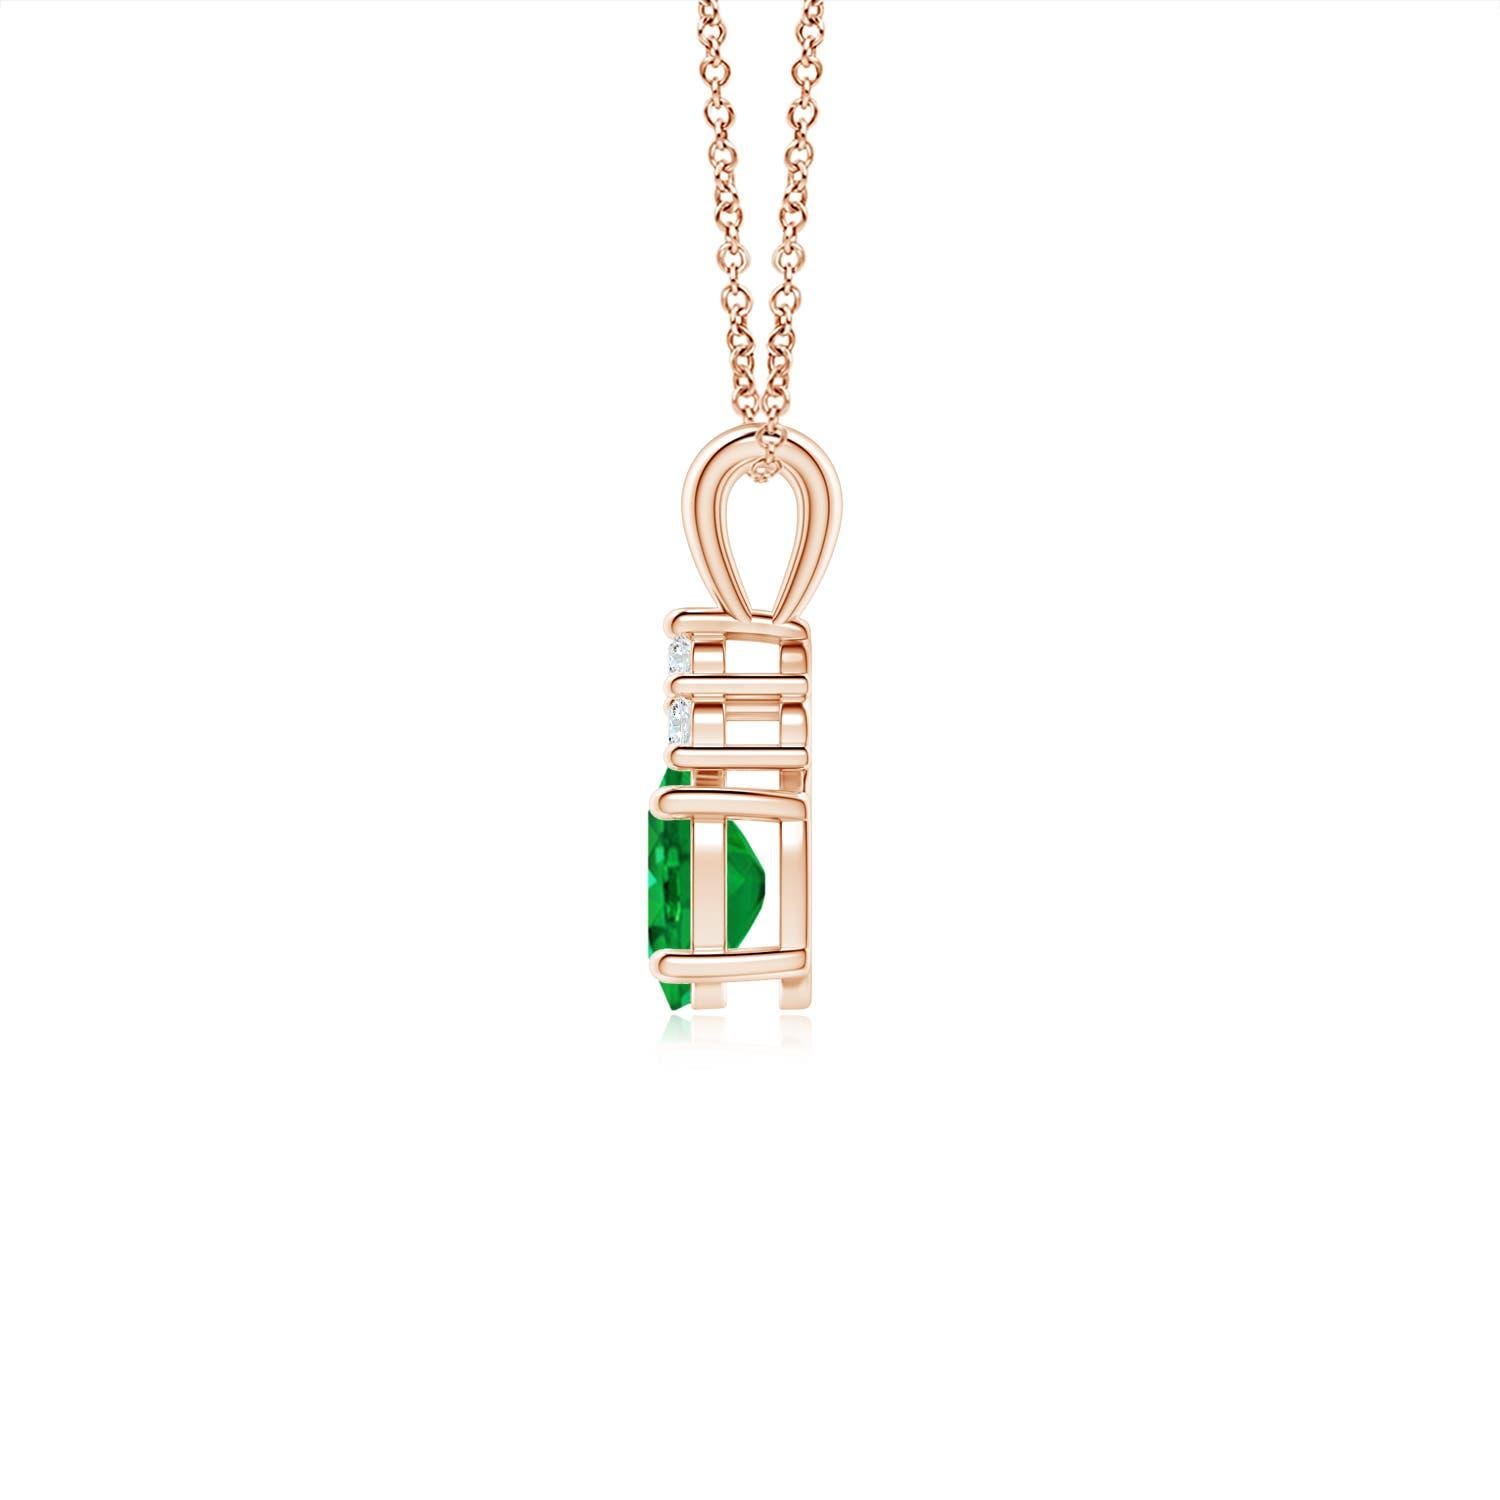 Set in 14k rose gold, this classic solitaire emerald pendant showcases the perfect blend of style and elegance. It features a lush green emerald adorned with three sparkling round diamonds on the top. Linked to a lustrous v-bale, this four-prong set